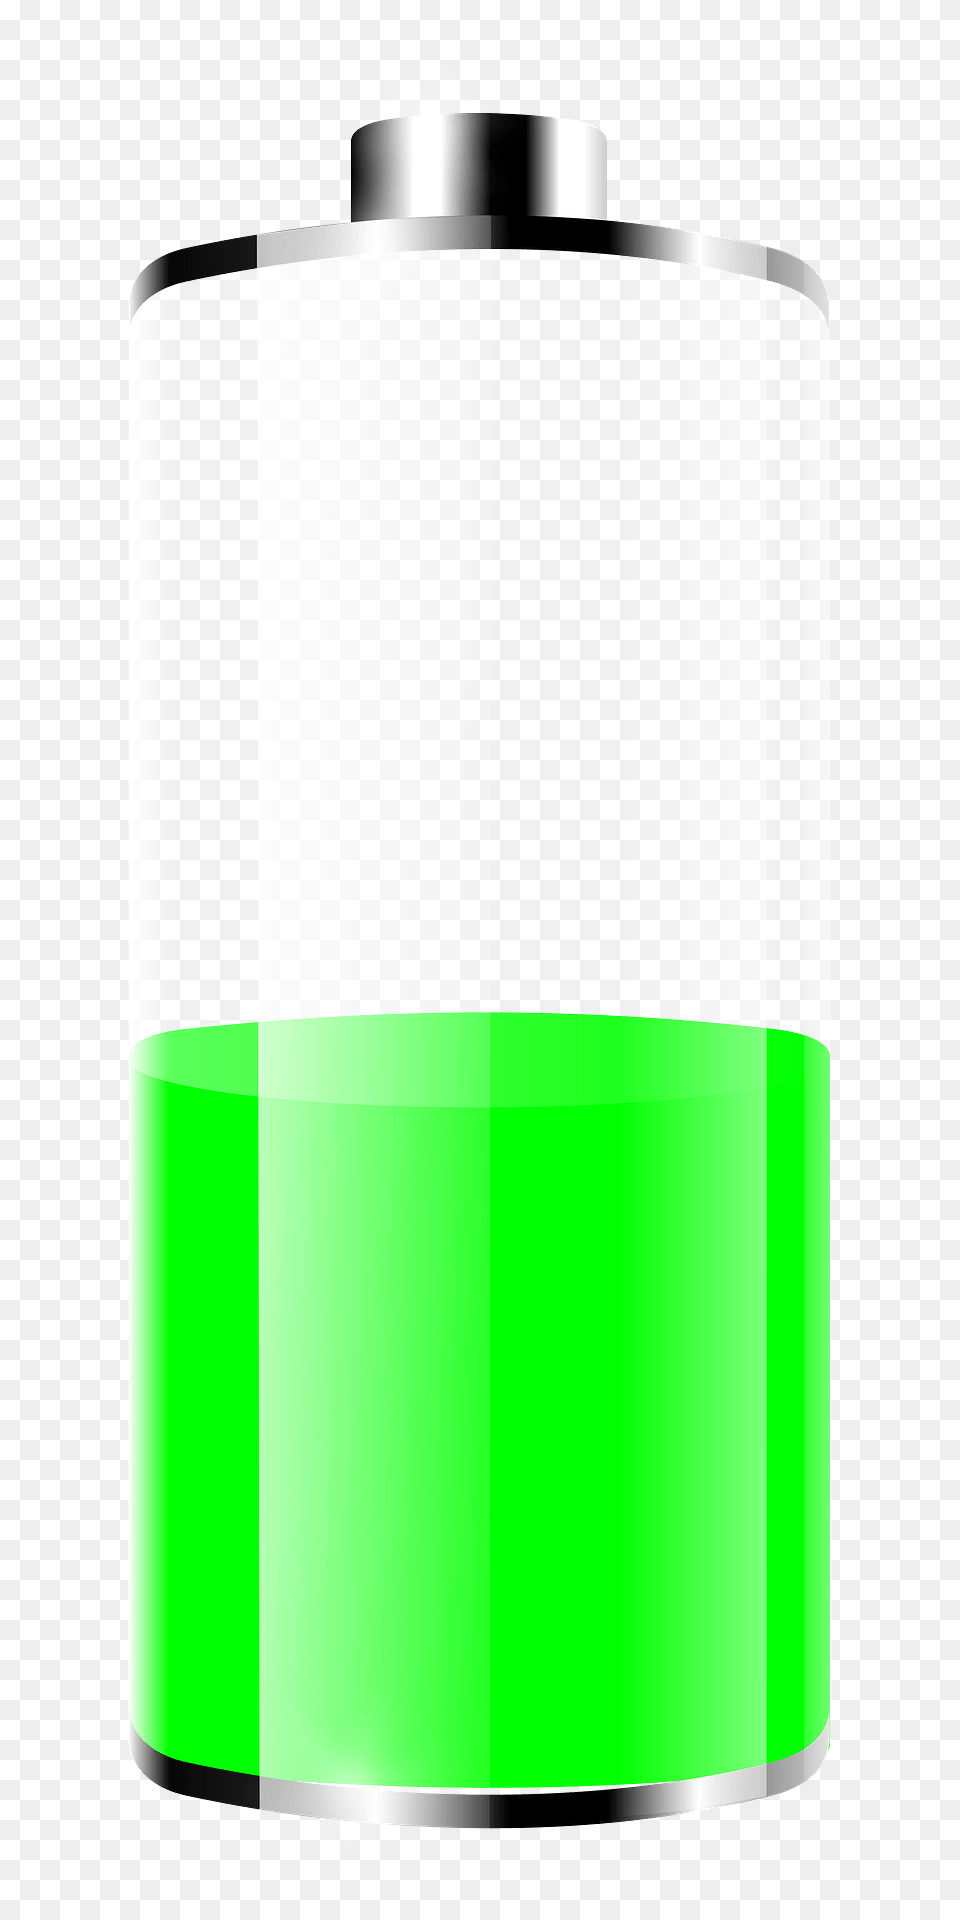 Green And White Battery Clipart, Bottle, Shaker, Jar Png